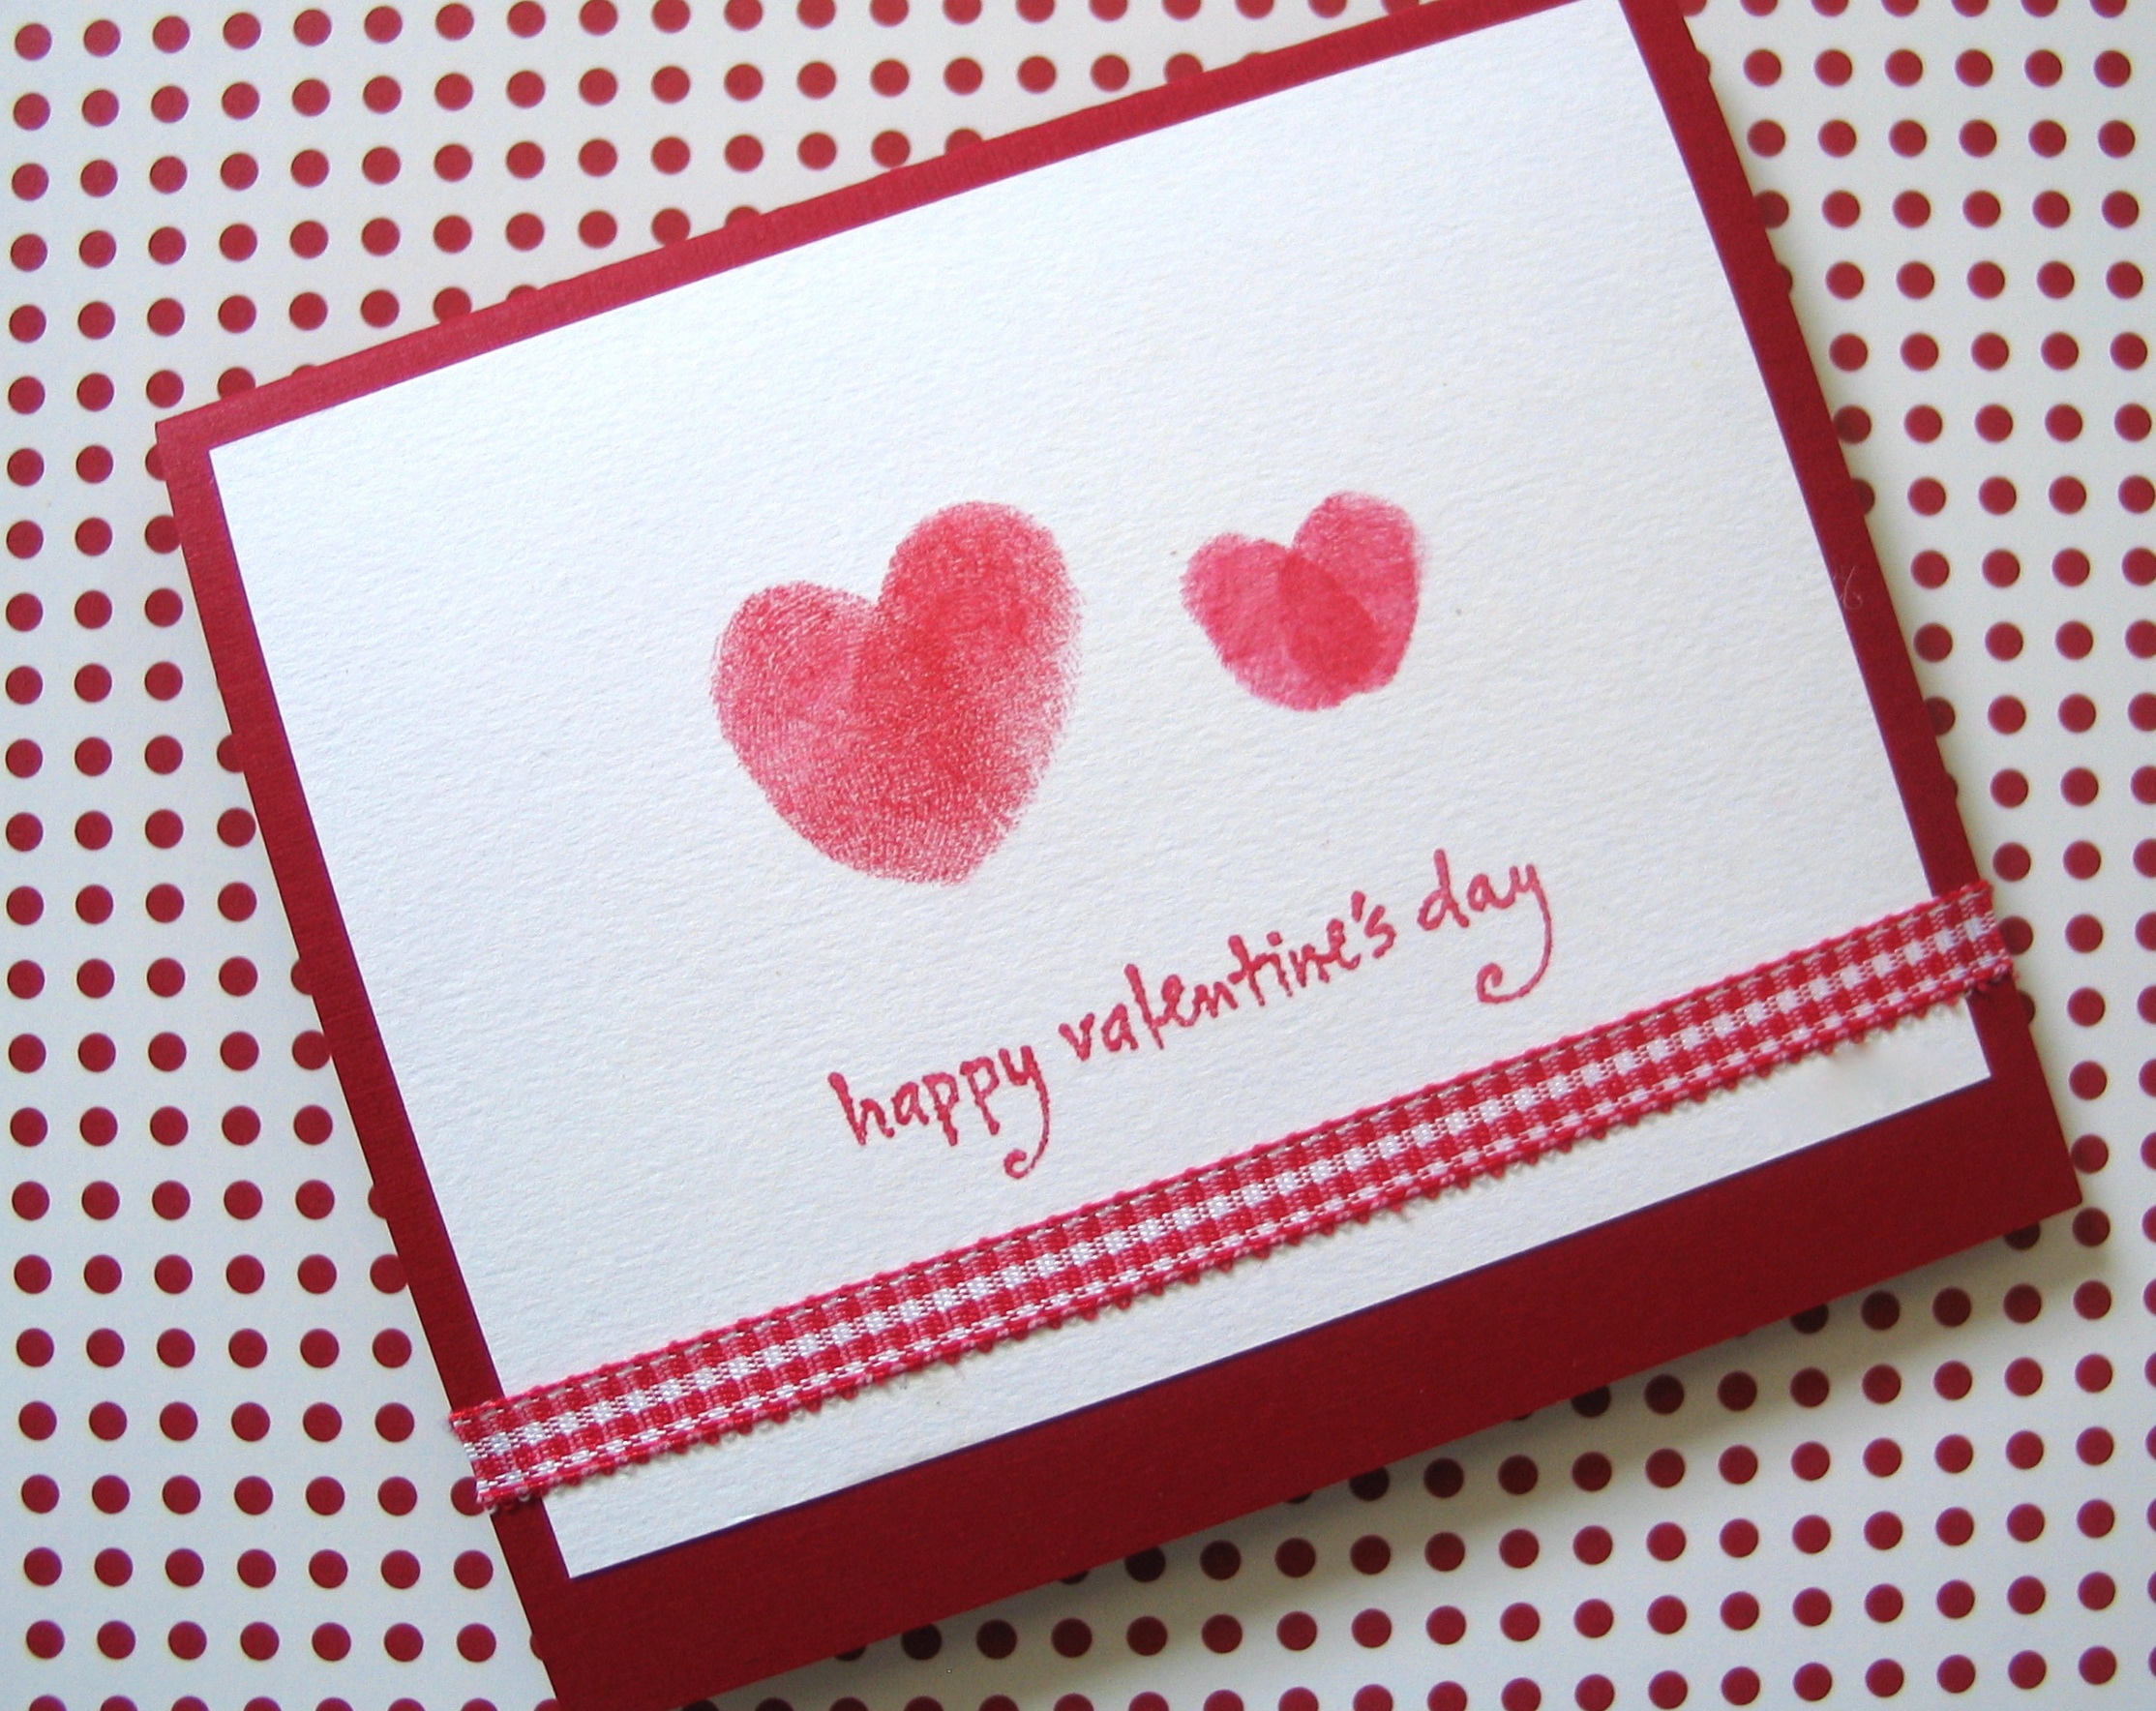 Valentines Day Photo Cards - Valentines Day Greeting Cards.